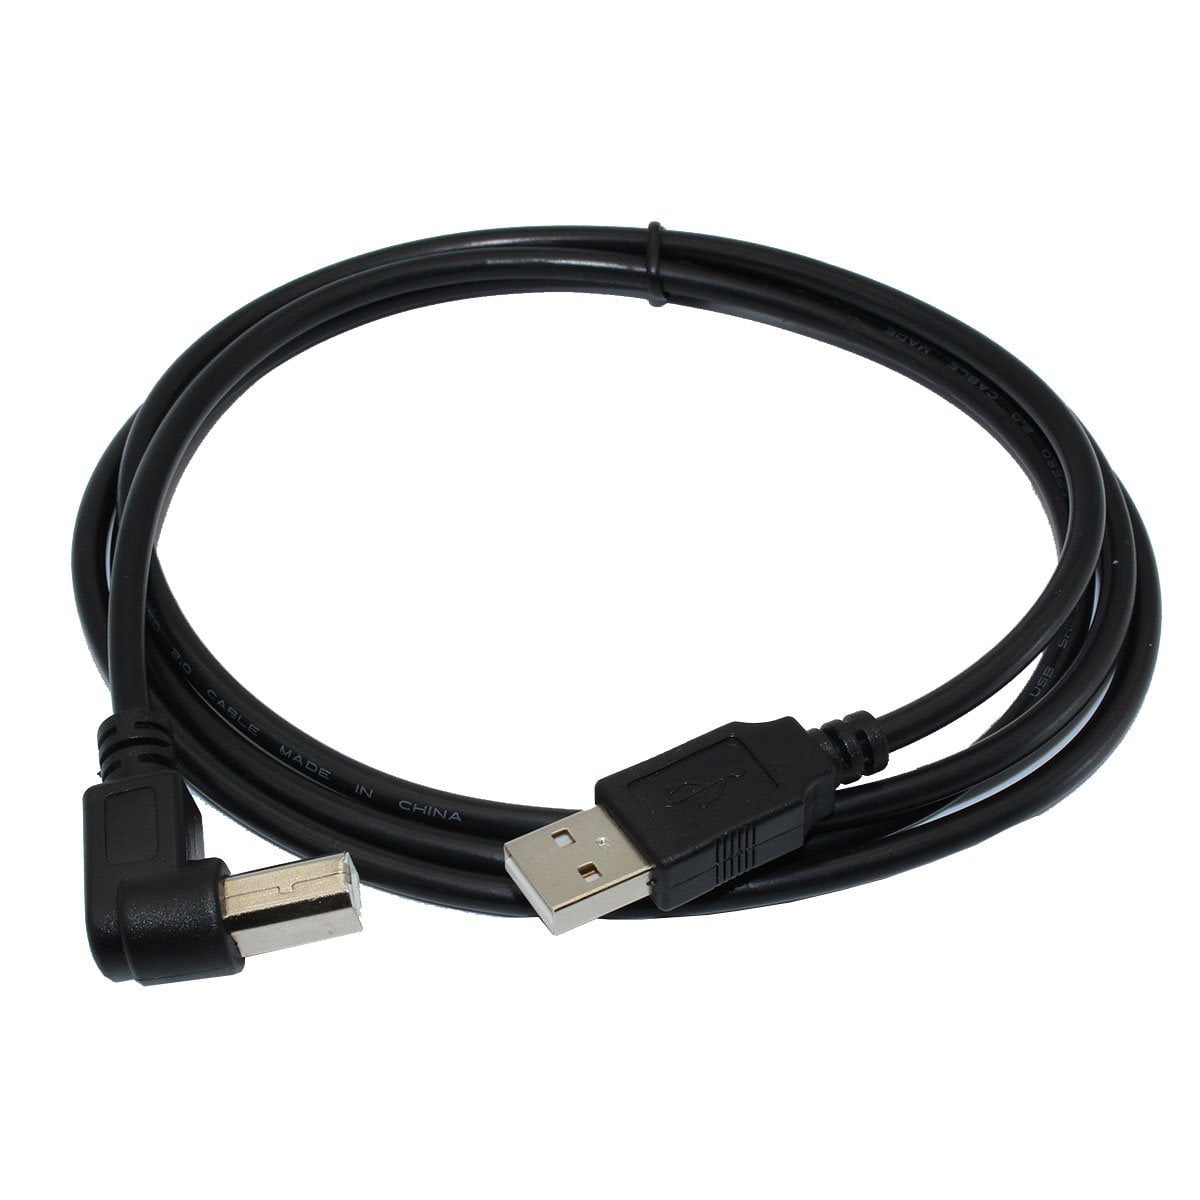 50 feet EpicDealz USB Cable for HP Envy 5550 E-all-in-one Printer Black